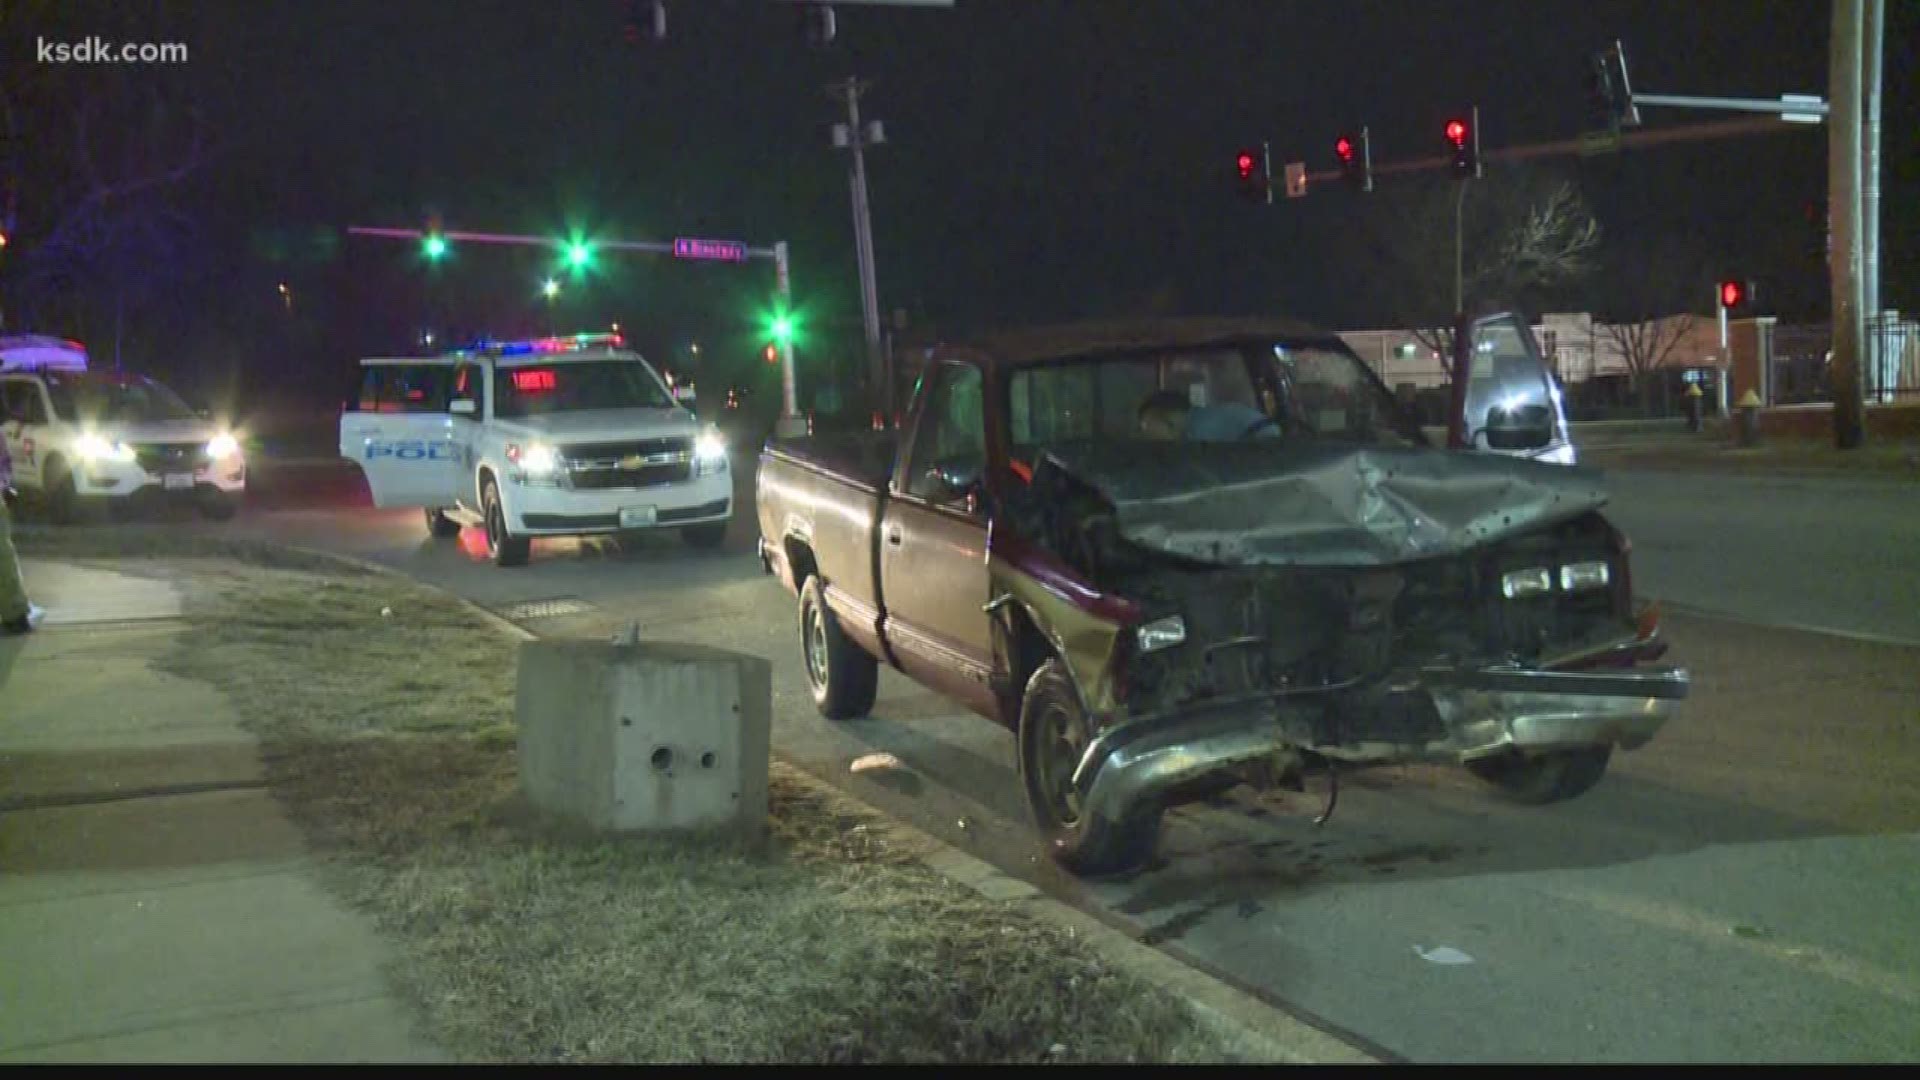 A driver was arrested after a hit-and-run crash near O'Fallon Park. The victim said he's thankful he's okay.